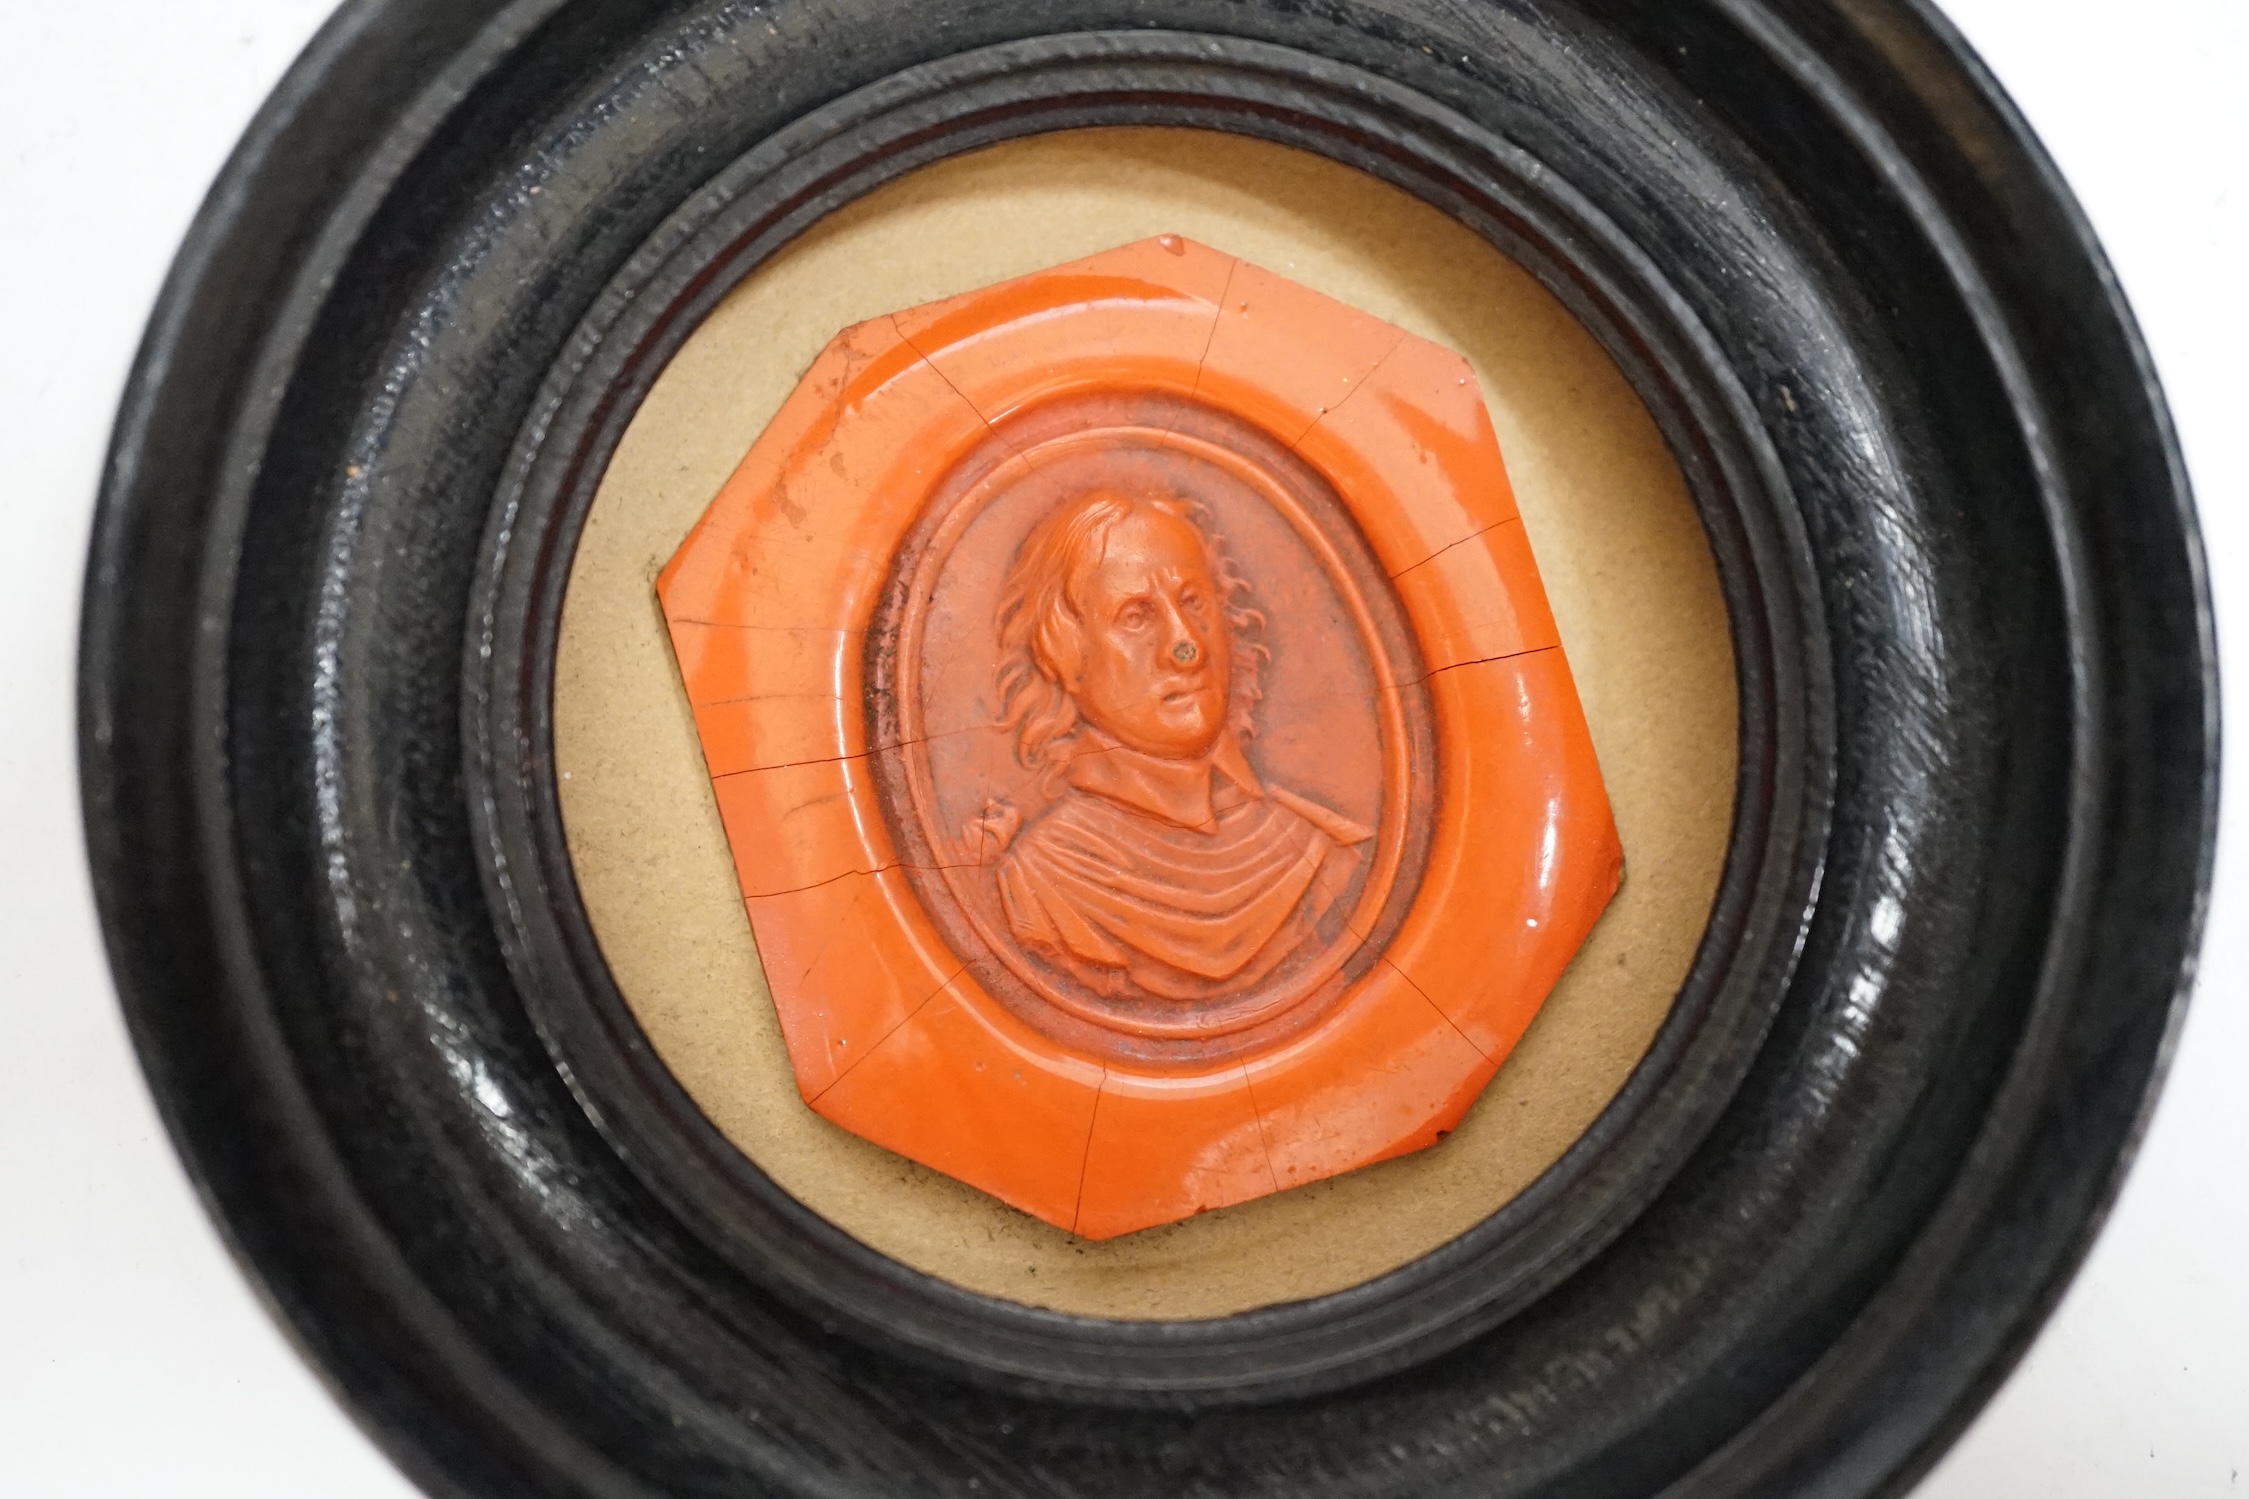 An ‘Oliver Cromwell’ framed red wax portrait, label verso reads ‘Oliver Cromwell the founder of English Liberty born 1599 died 1658 Emilie J. Bosignieu? 19-/68?’, 8.5cm diameter. Condition - fair